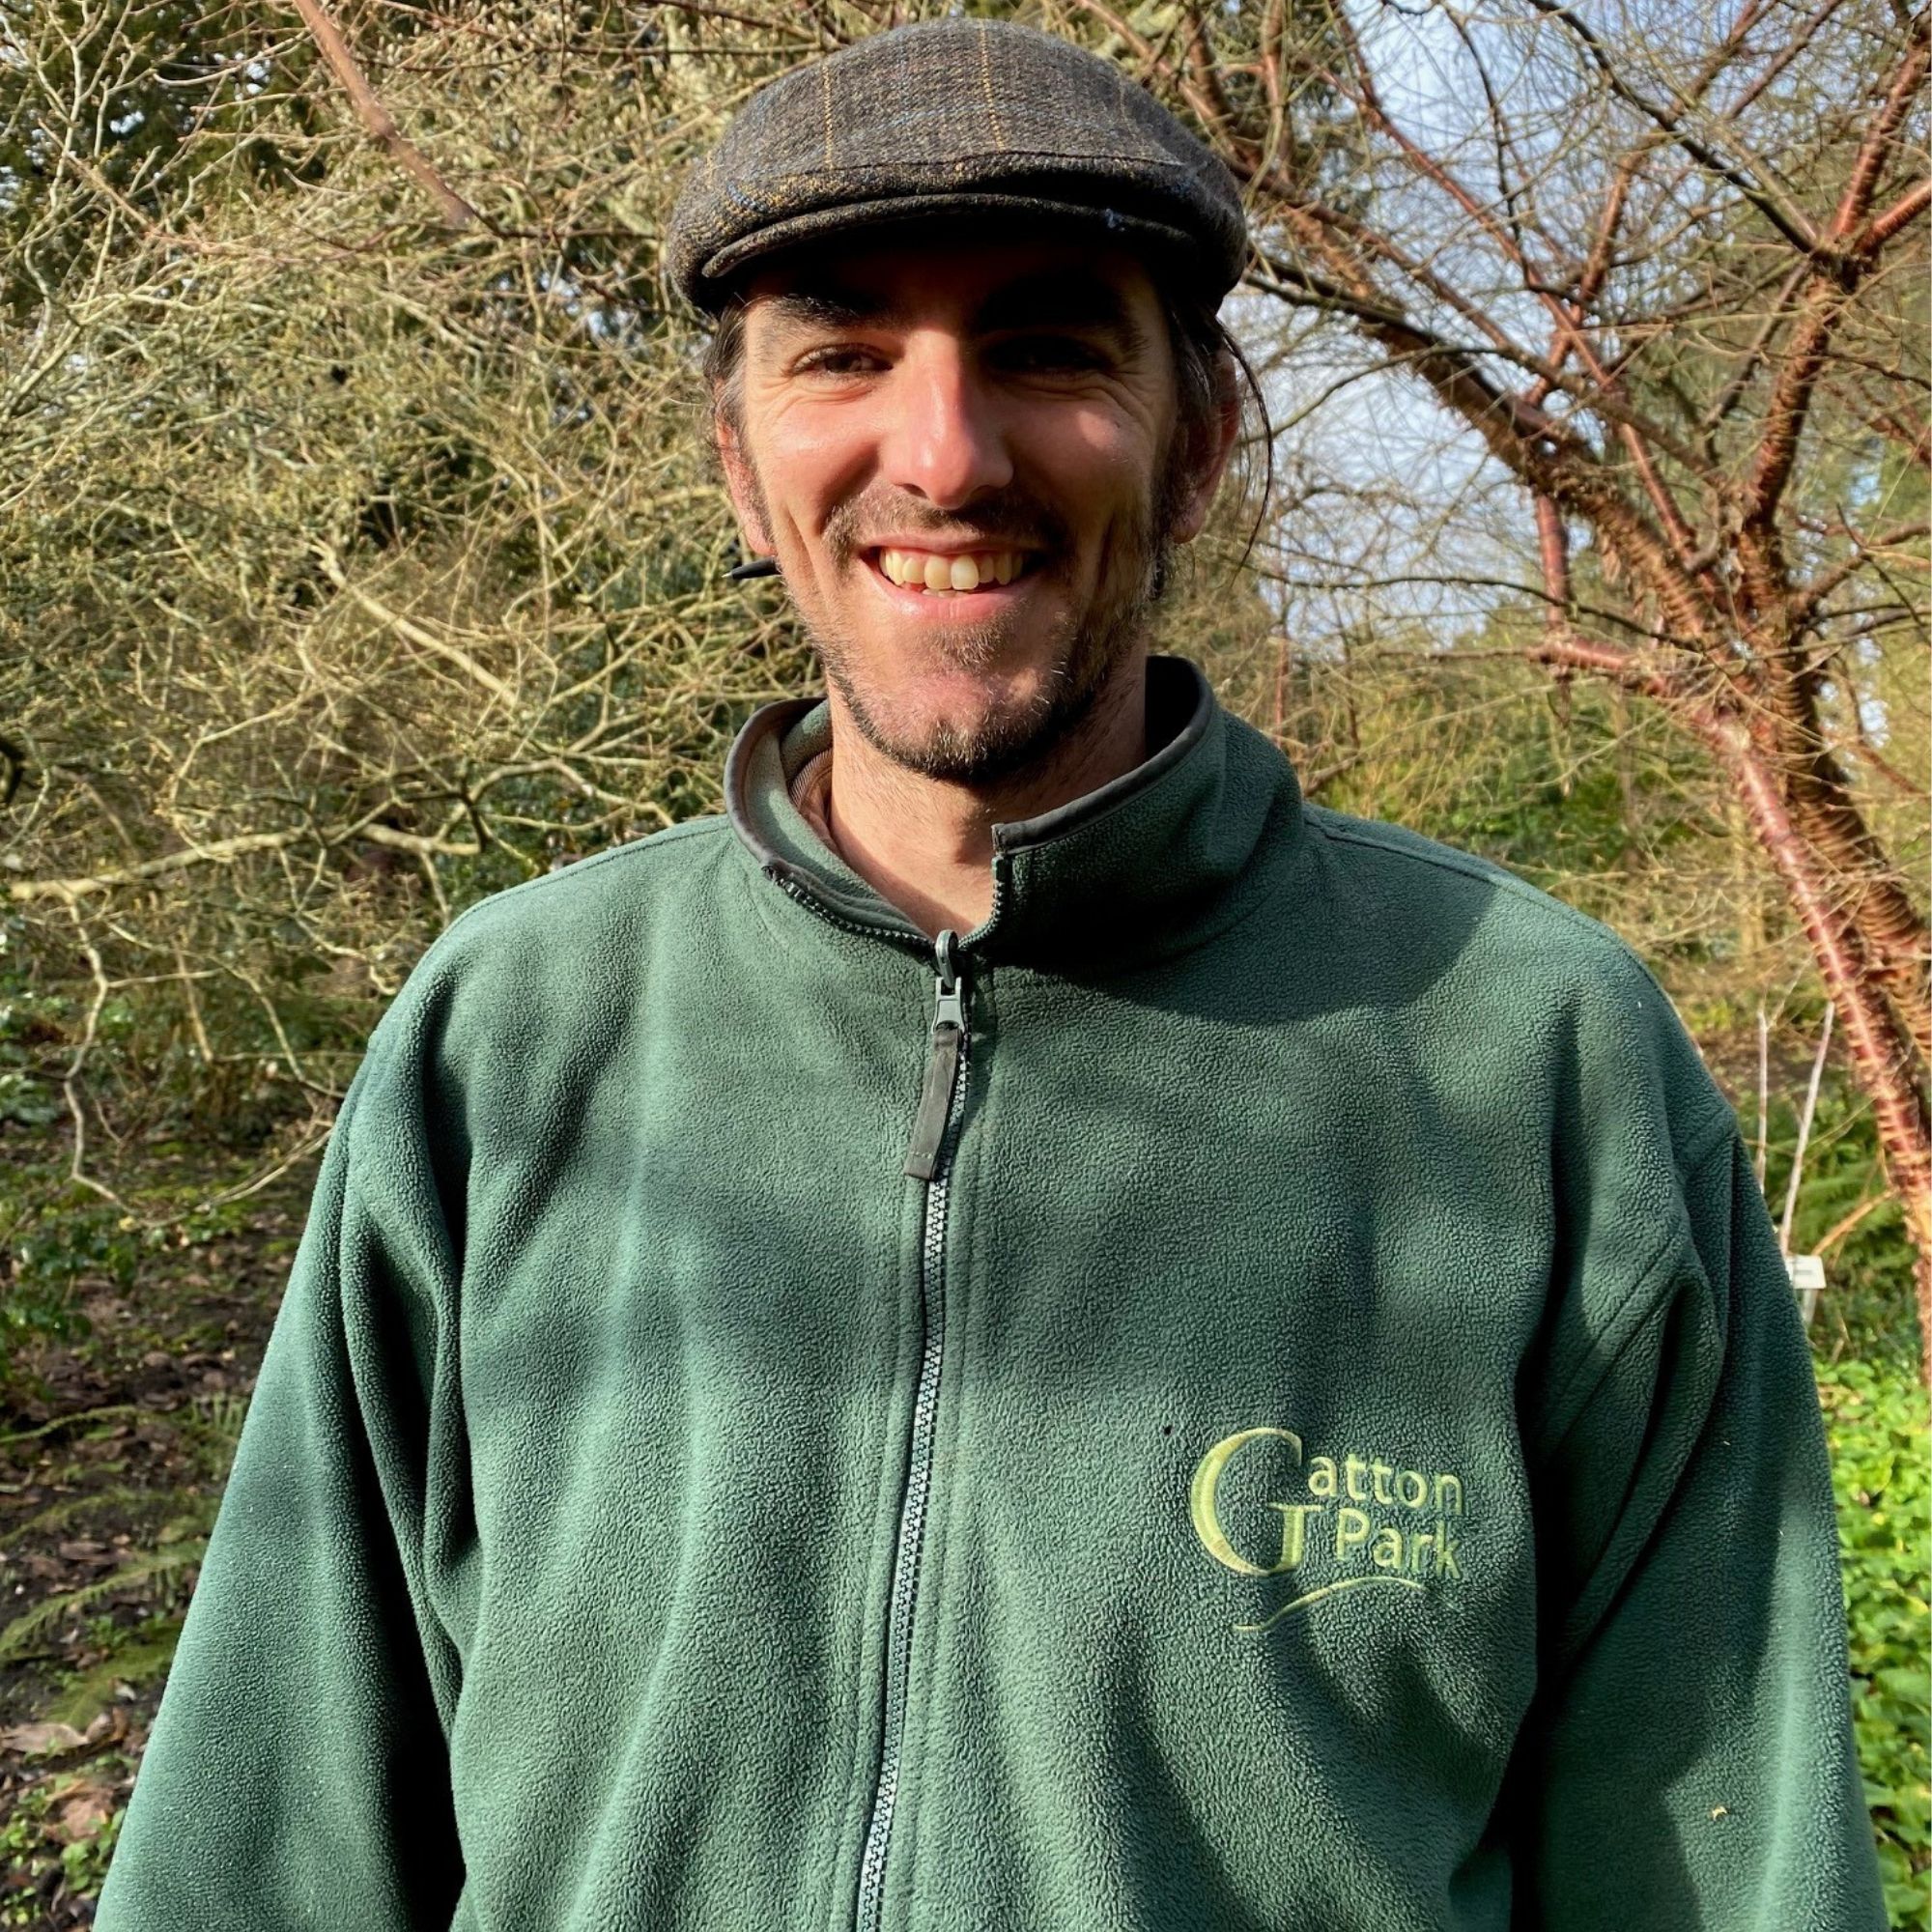 Dan Ryan, pParks and garden manager at Gatton Park